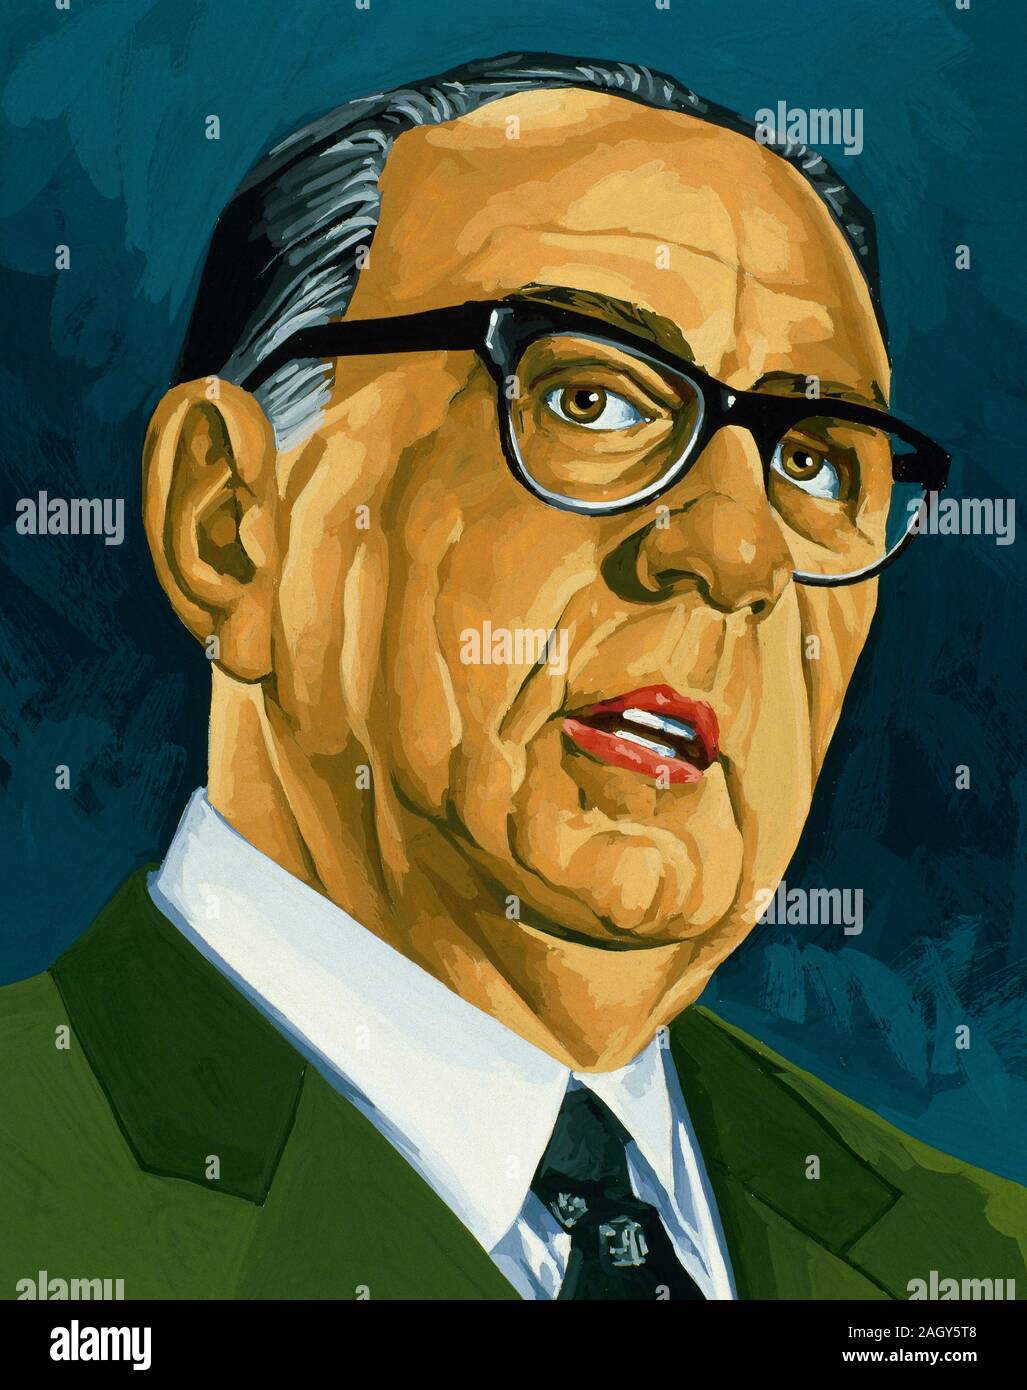 Manuel Aznar Zubigaray (1893-1975). Spanish diplomat under the Franco regime and one of the most important journalists of the 20th century in Spain. Portrait. Drawing and watercolor by the Spanish illustrator Francisco Fonollosa (d. late 20th century). Stock Photo